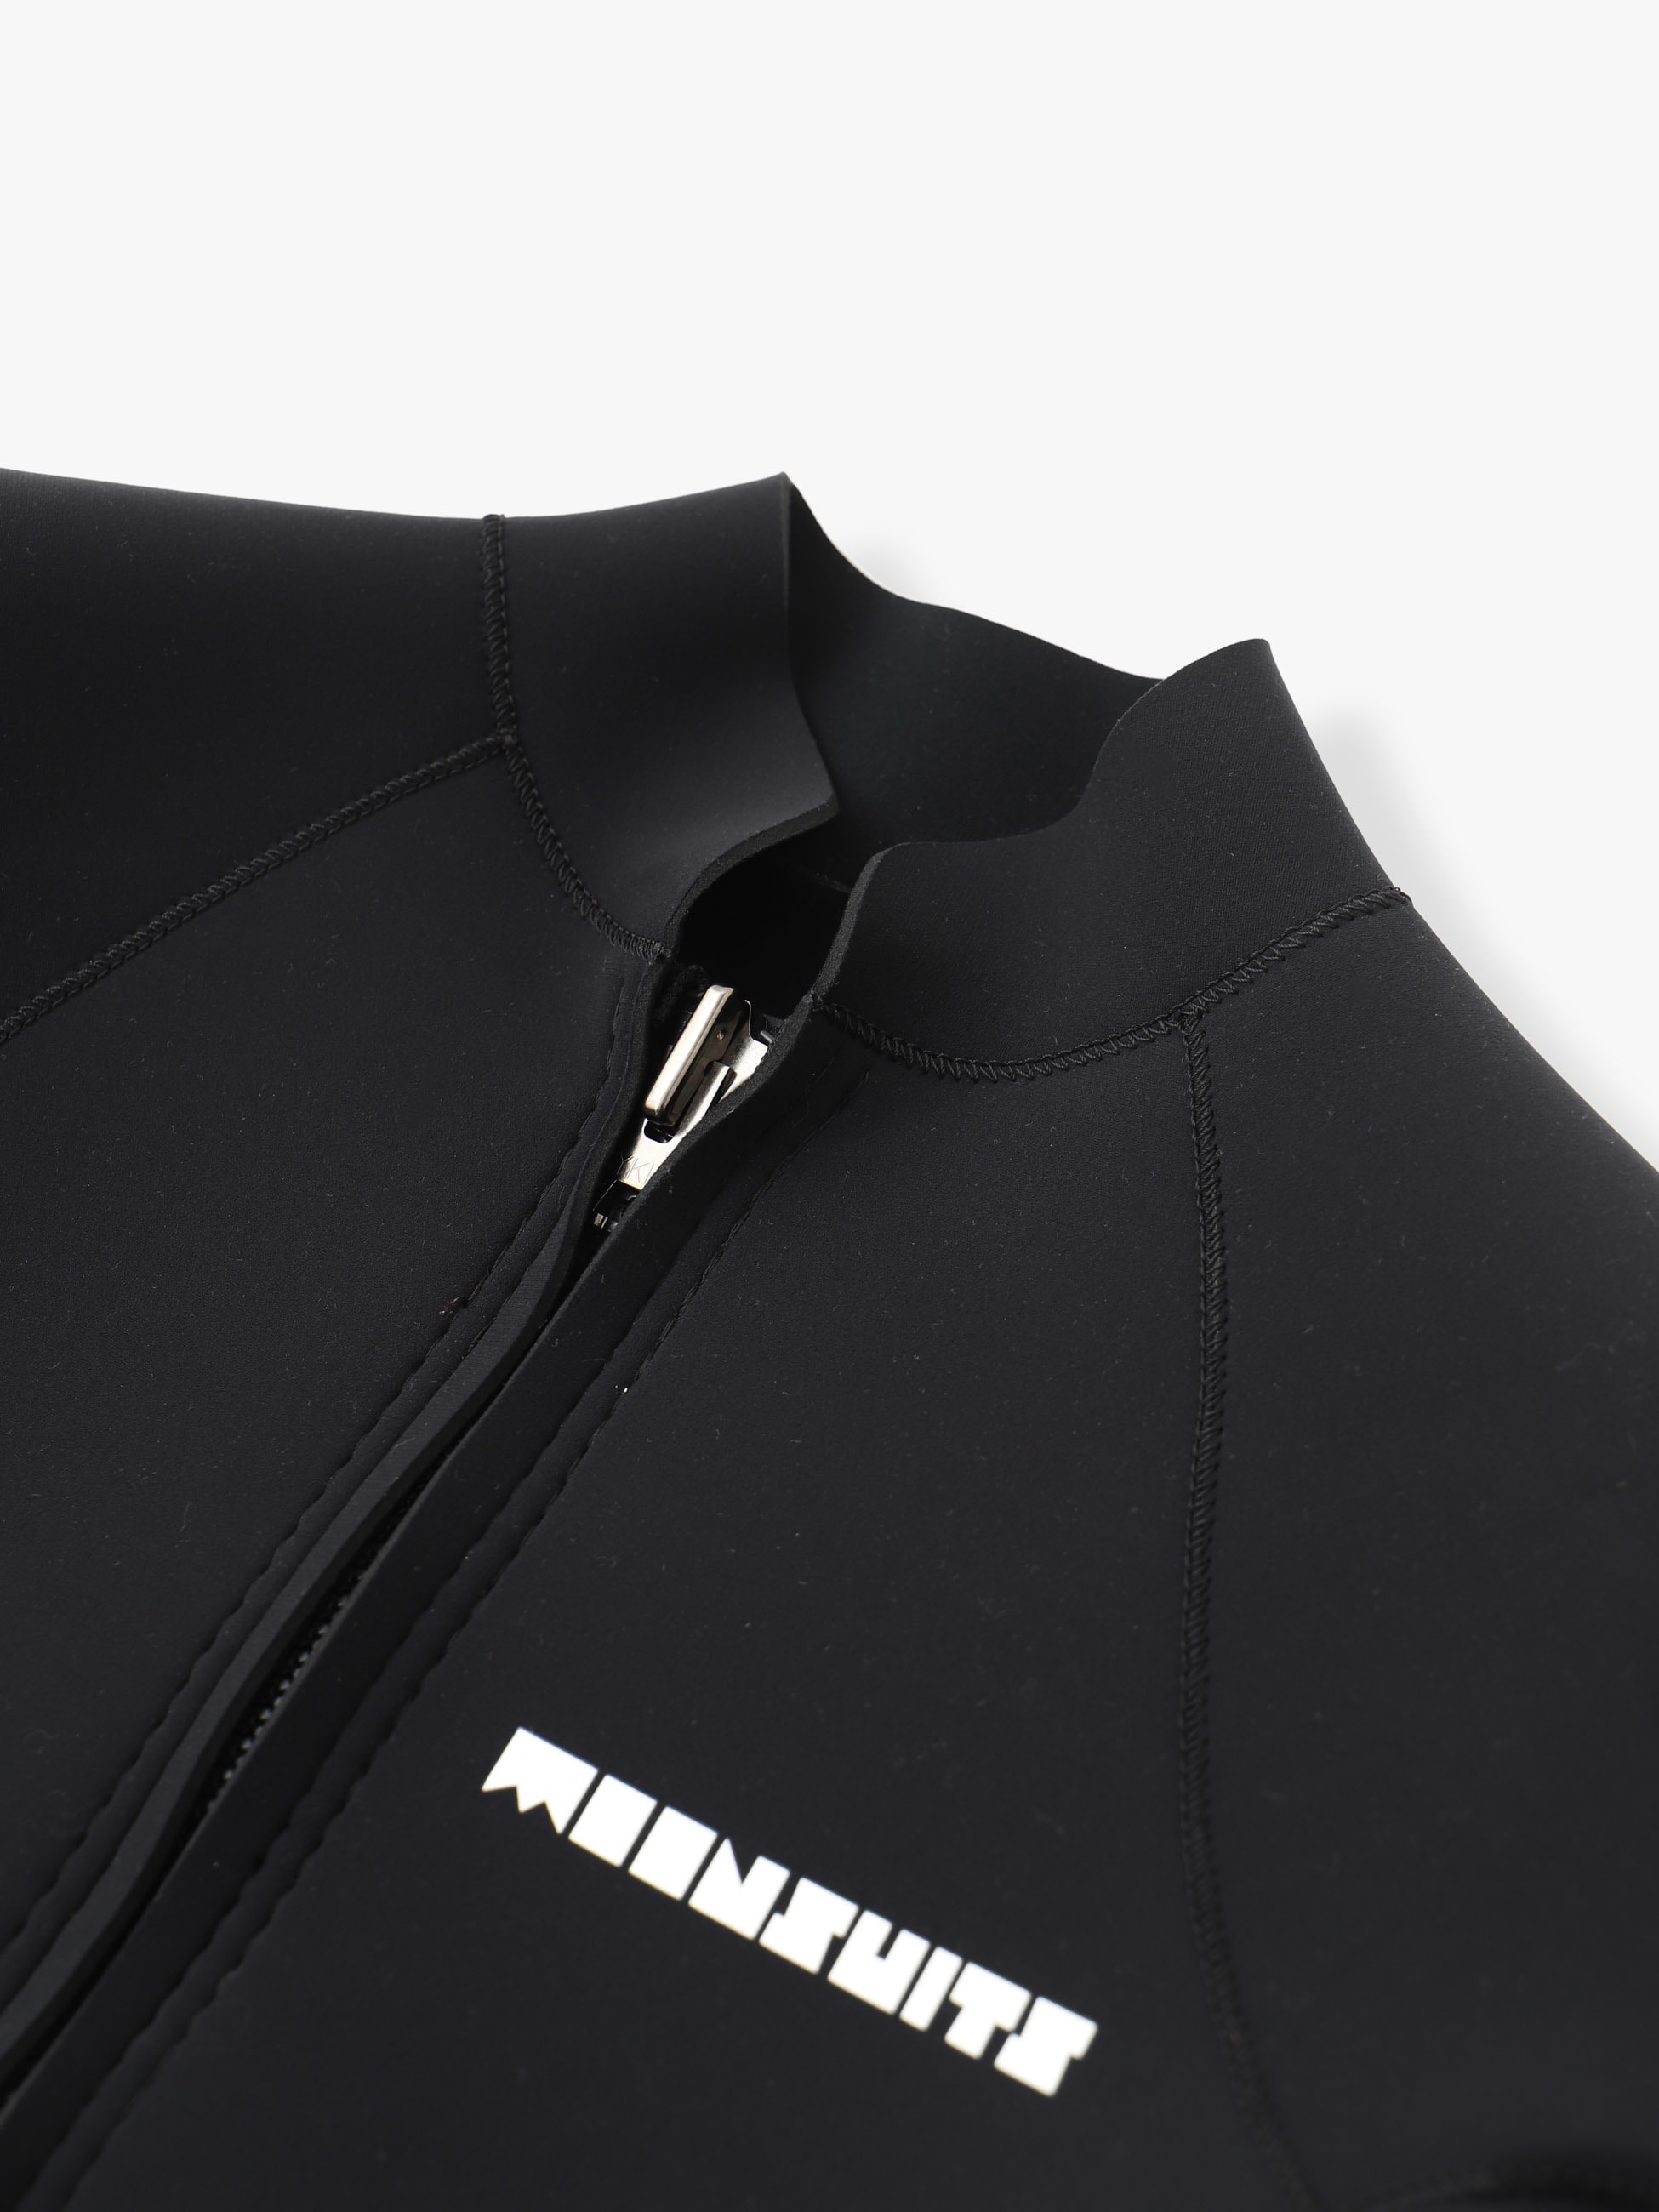 MOON WETSUITS Jacket Jersey